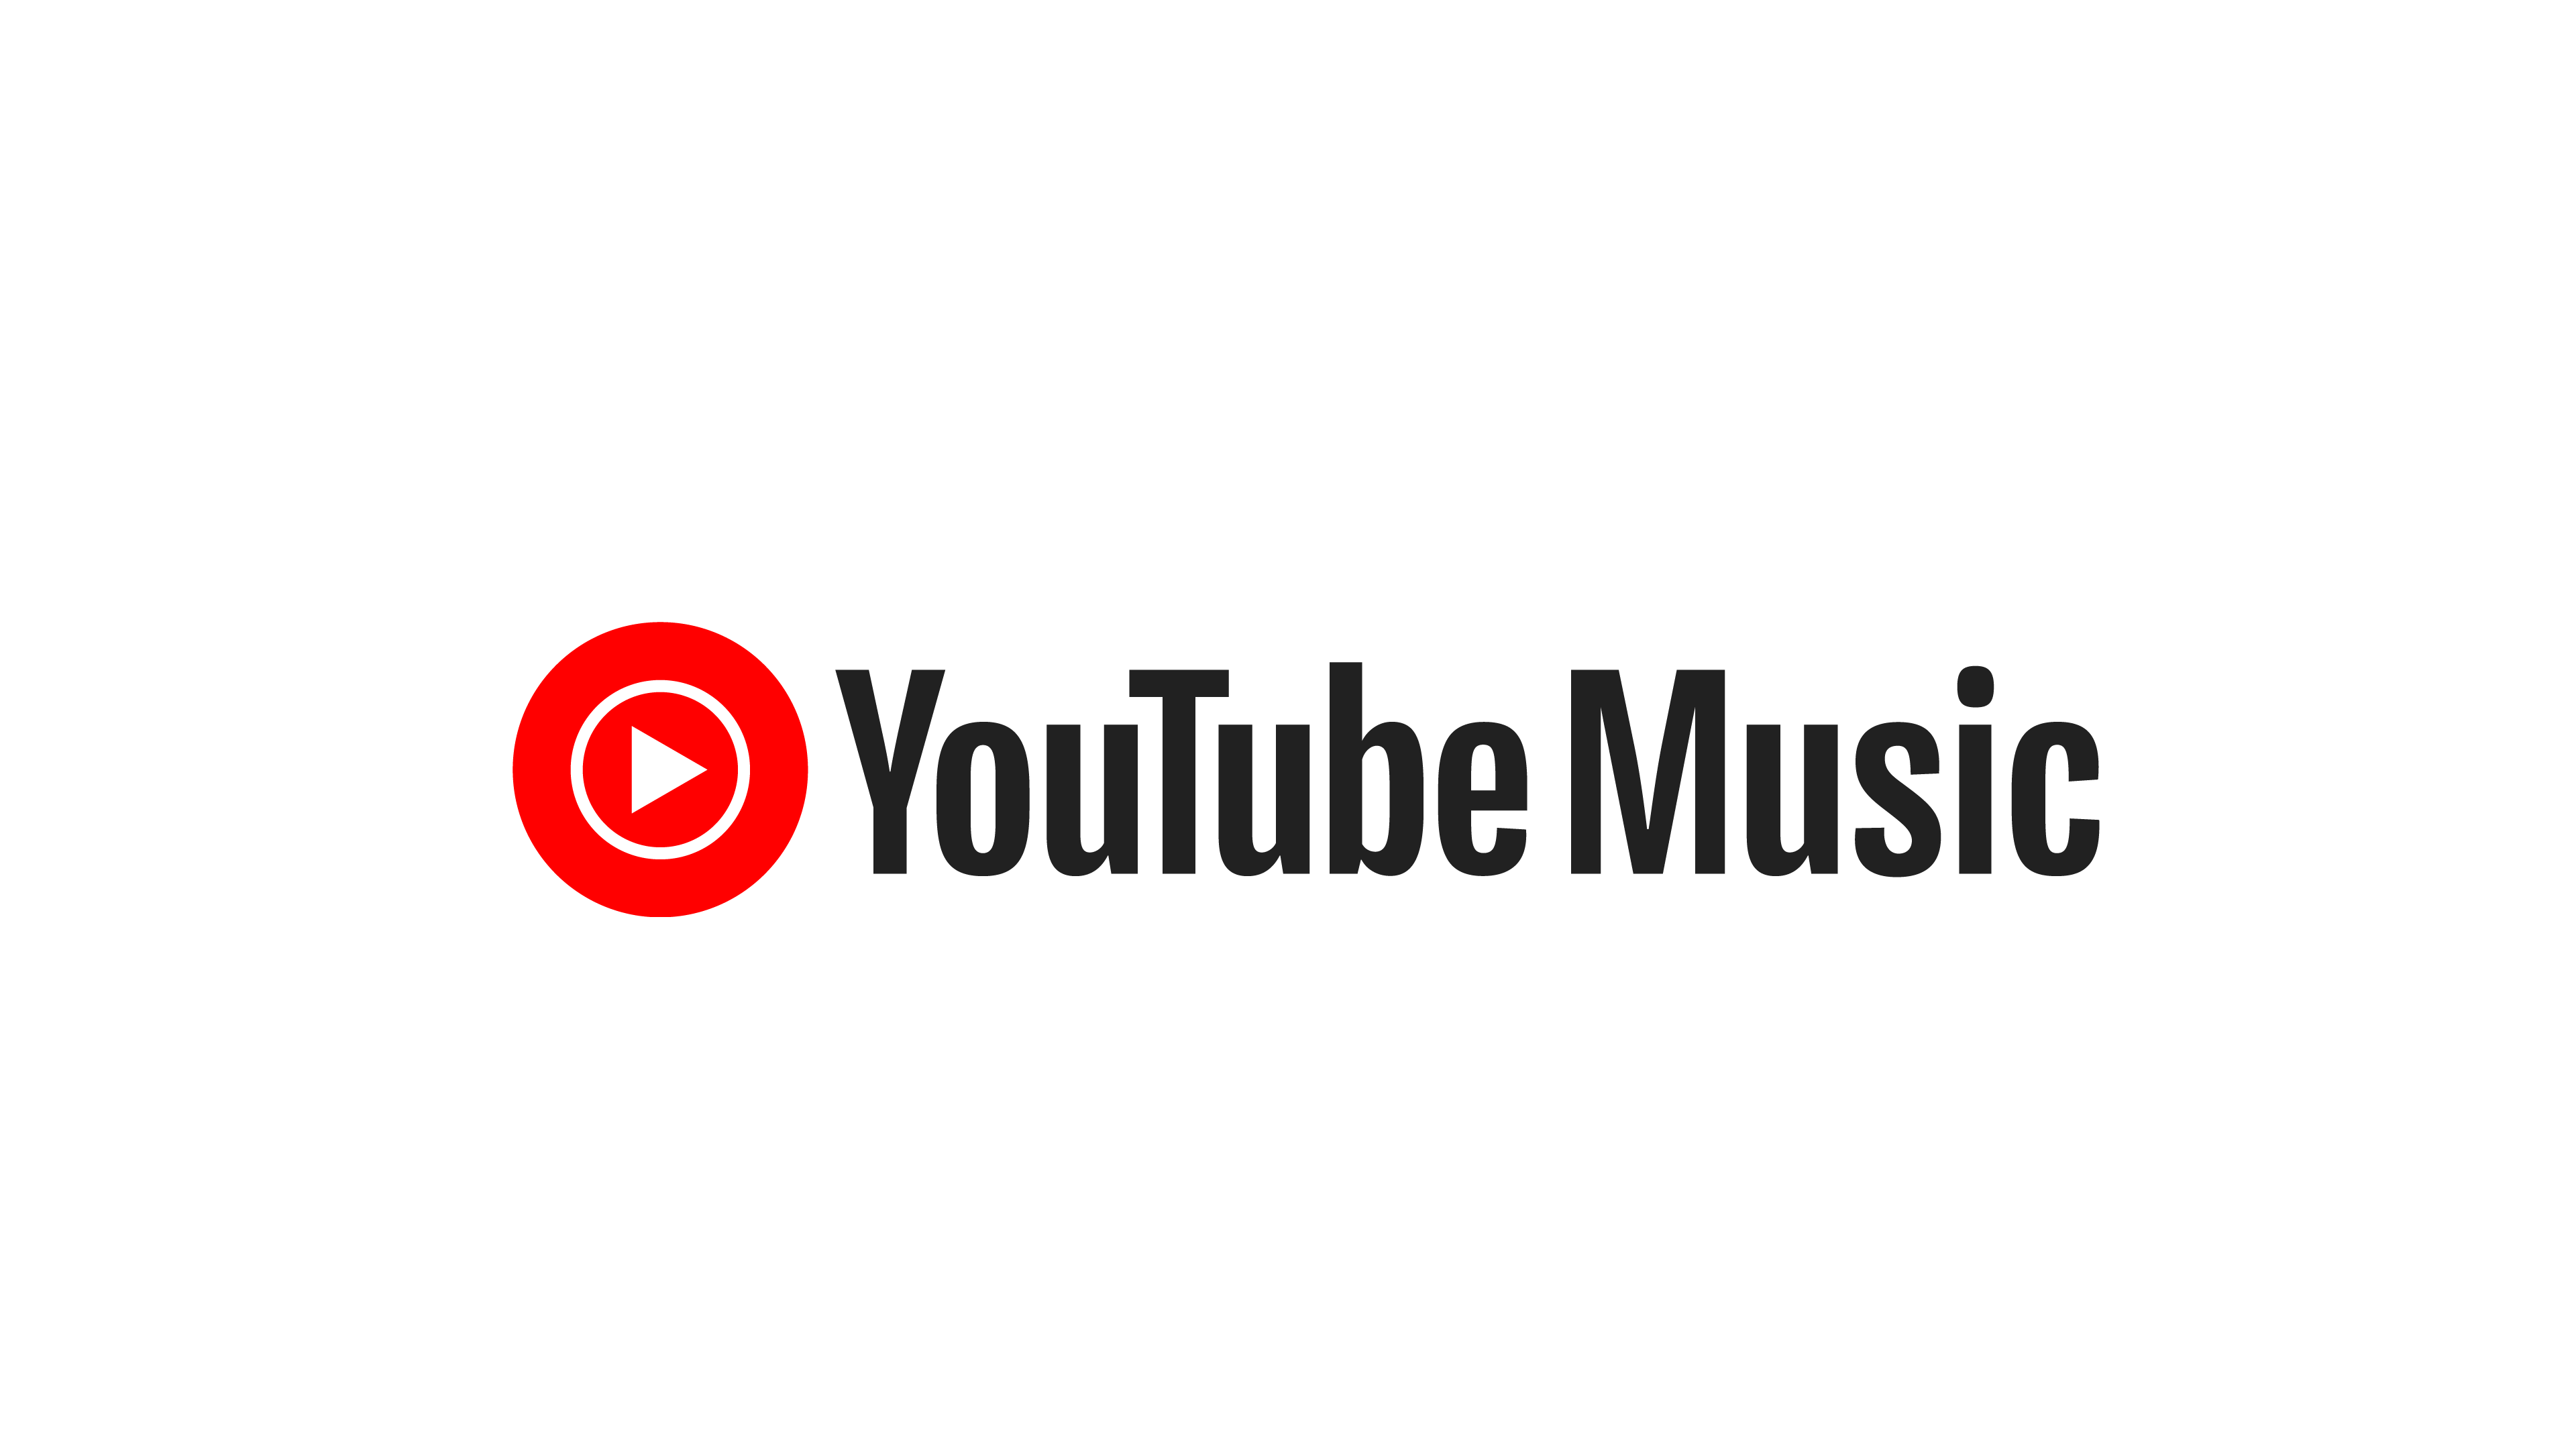 Artist pages get much hotter in YouTube Music redesign